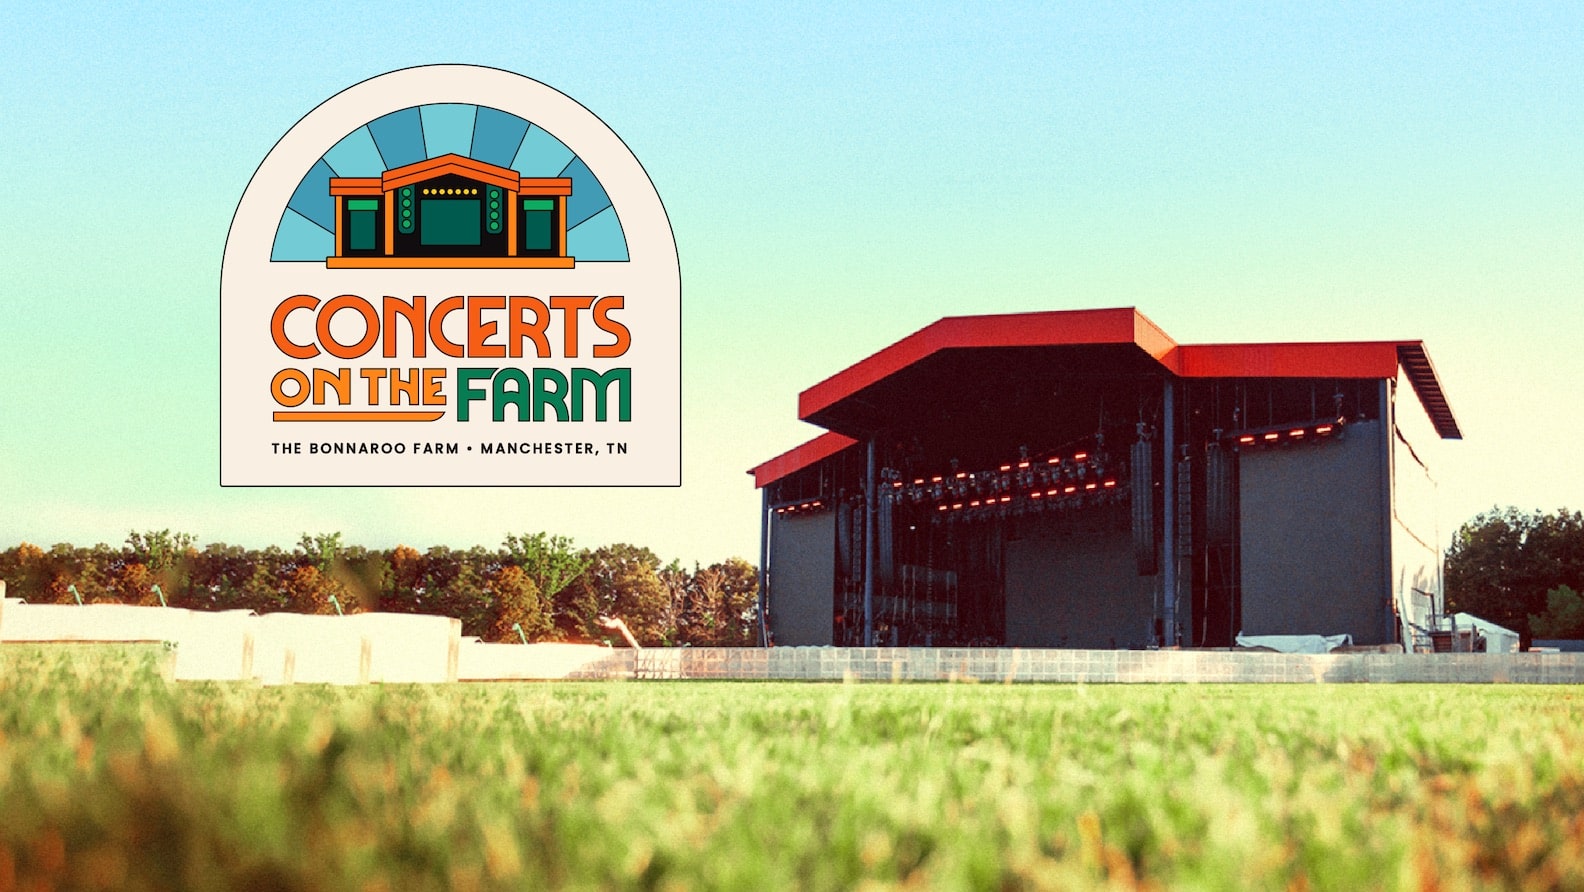 Bonnaroo Organizers Take Concerts On The Farm with The Avett Brothers, Jon Pardi, Billy Strings, and More